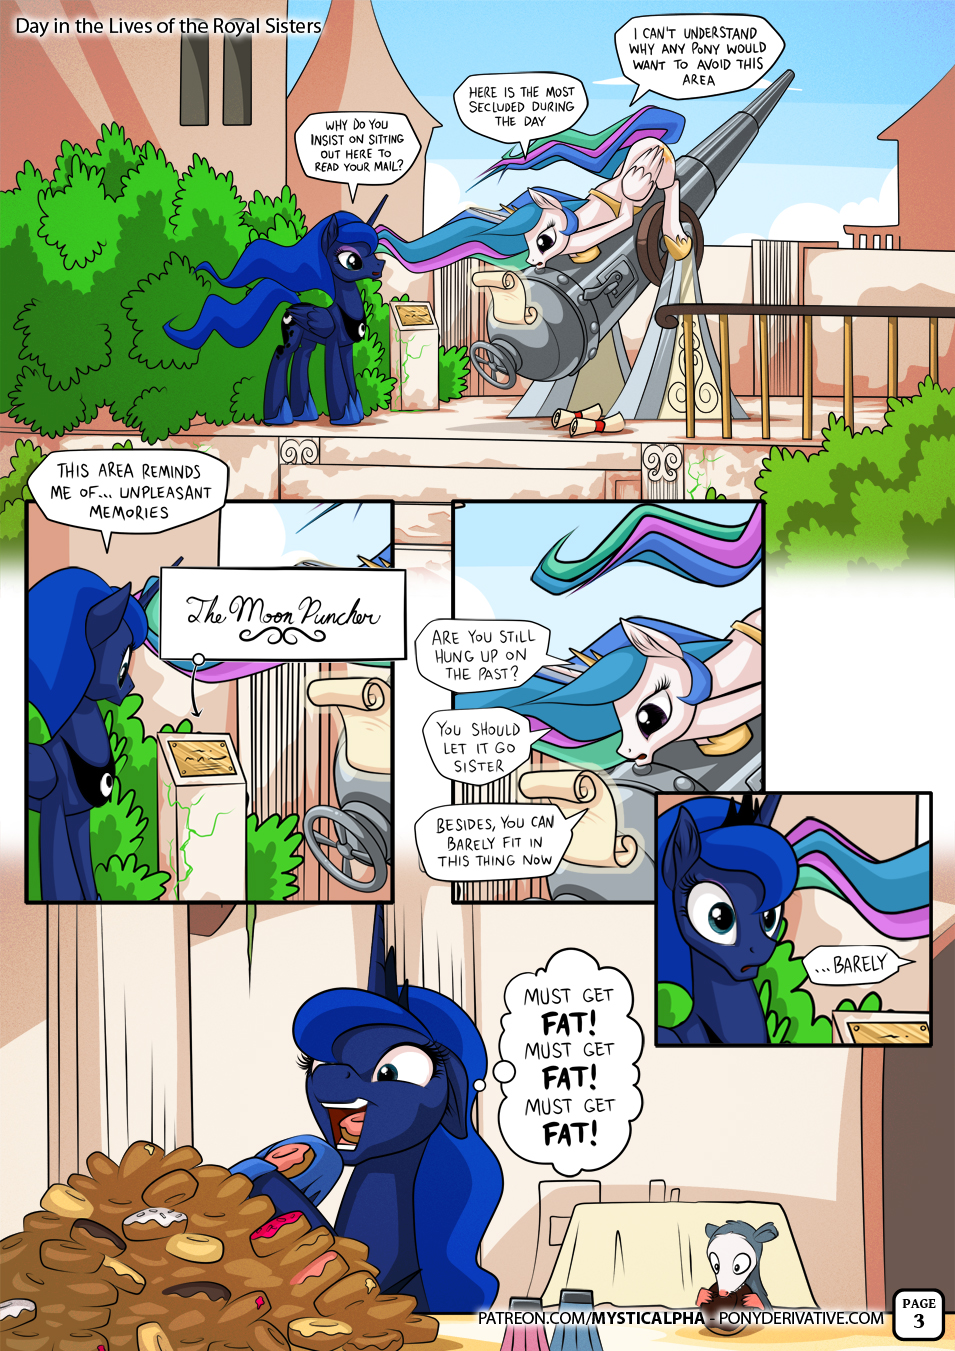 Day in the Lives of the Royal Sisters 03